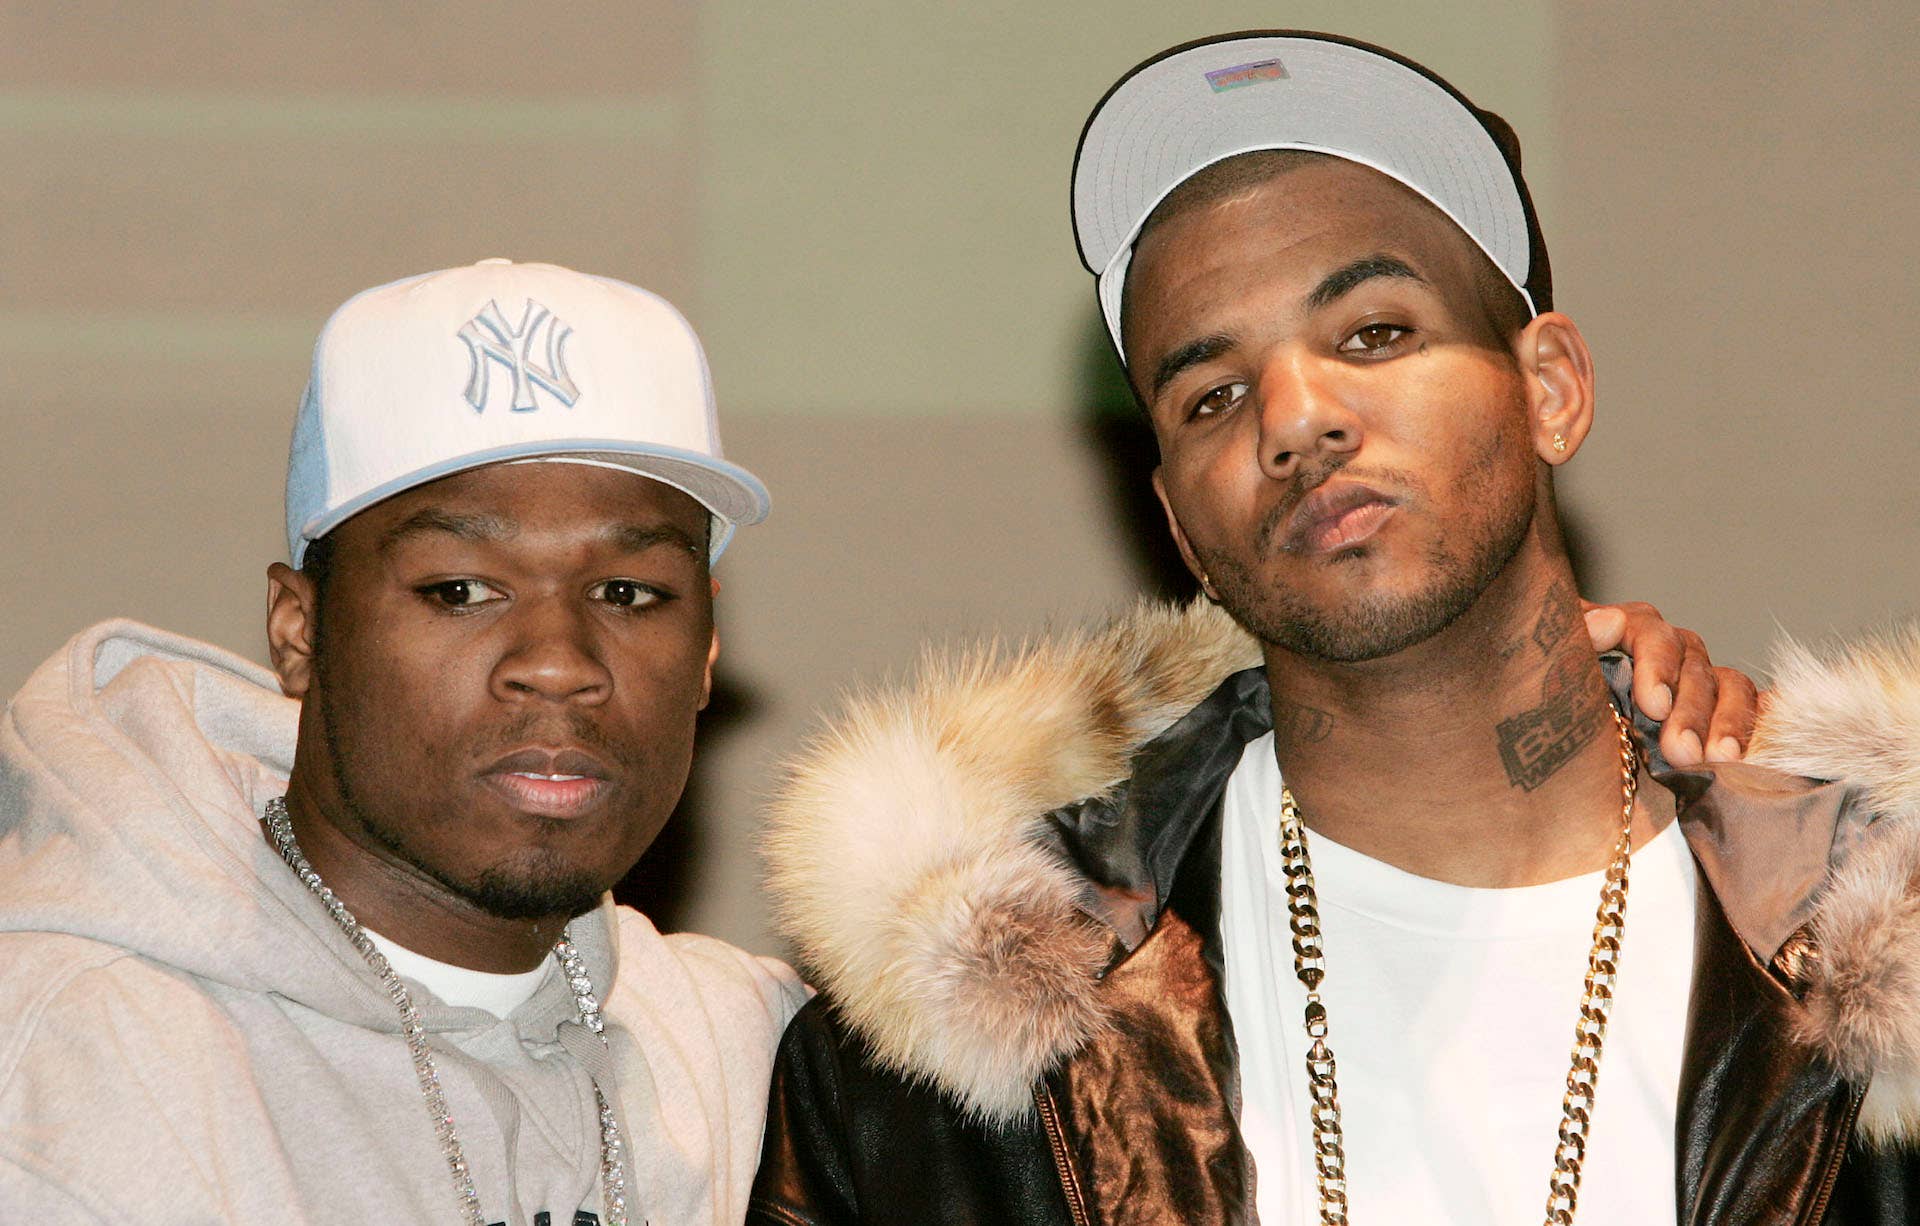 50 Cent and The Game attend an event in New York City in 2005